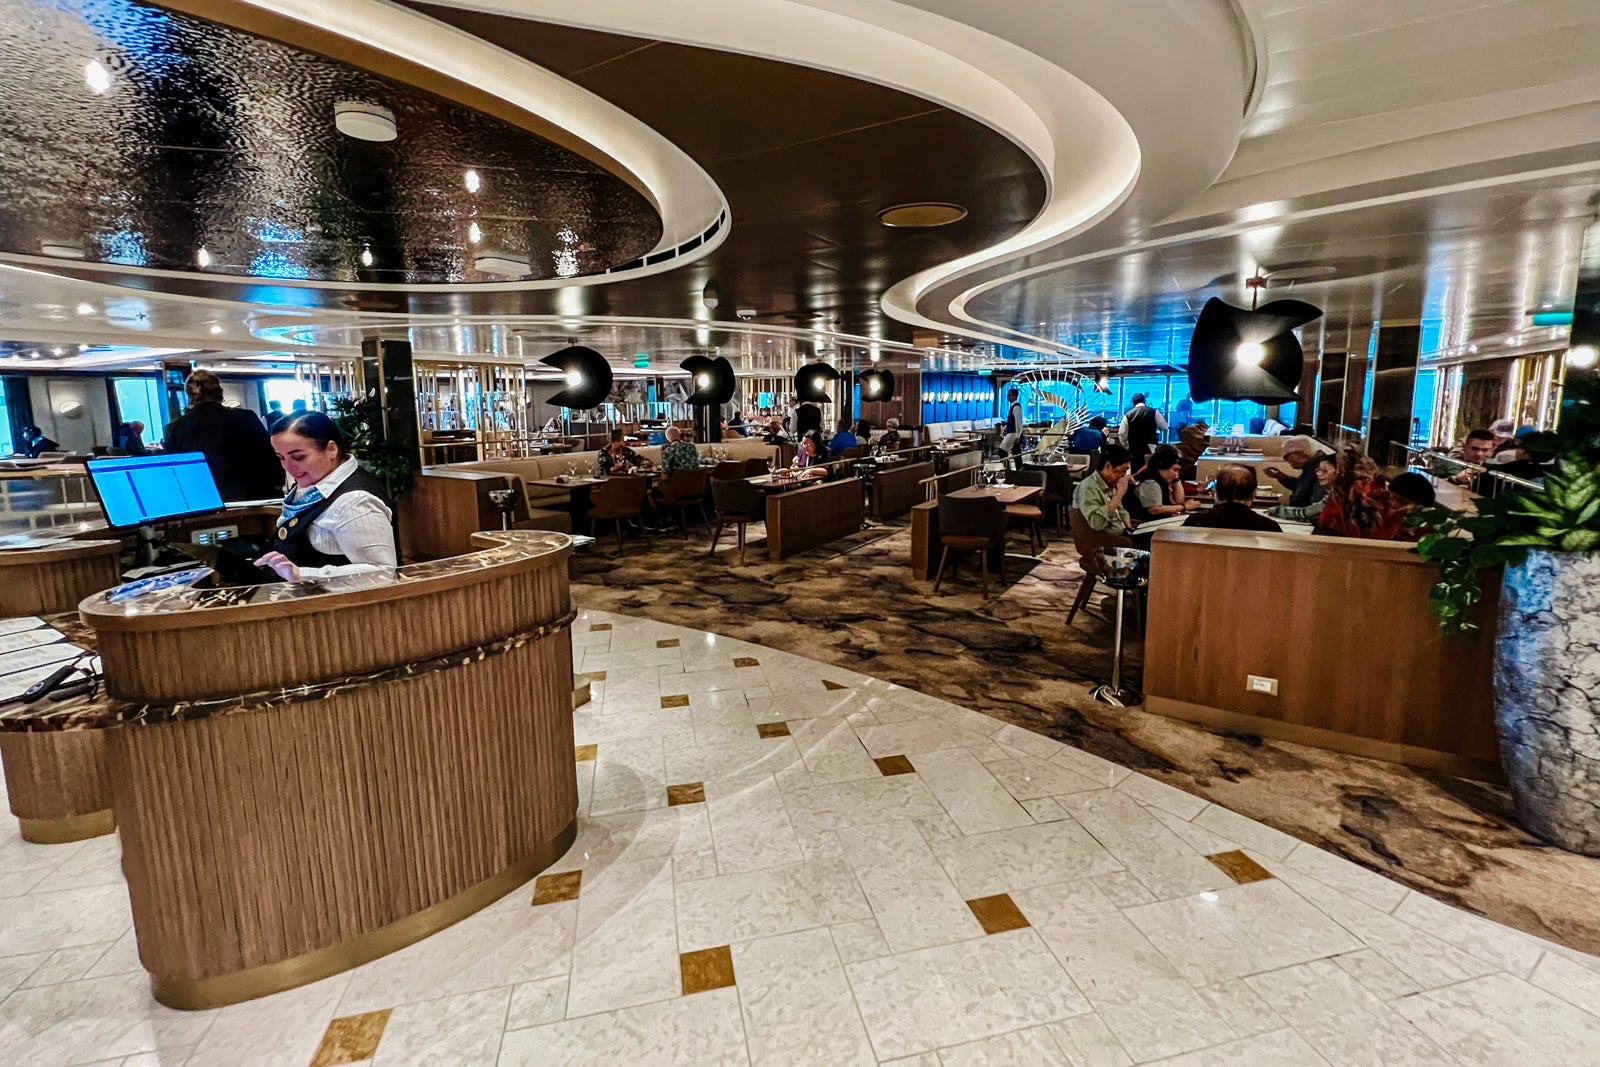 This major cruise line is now serving breakfast for dinner — in a fancy dining room